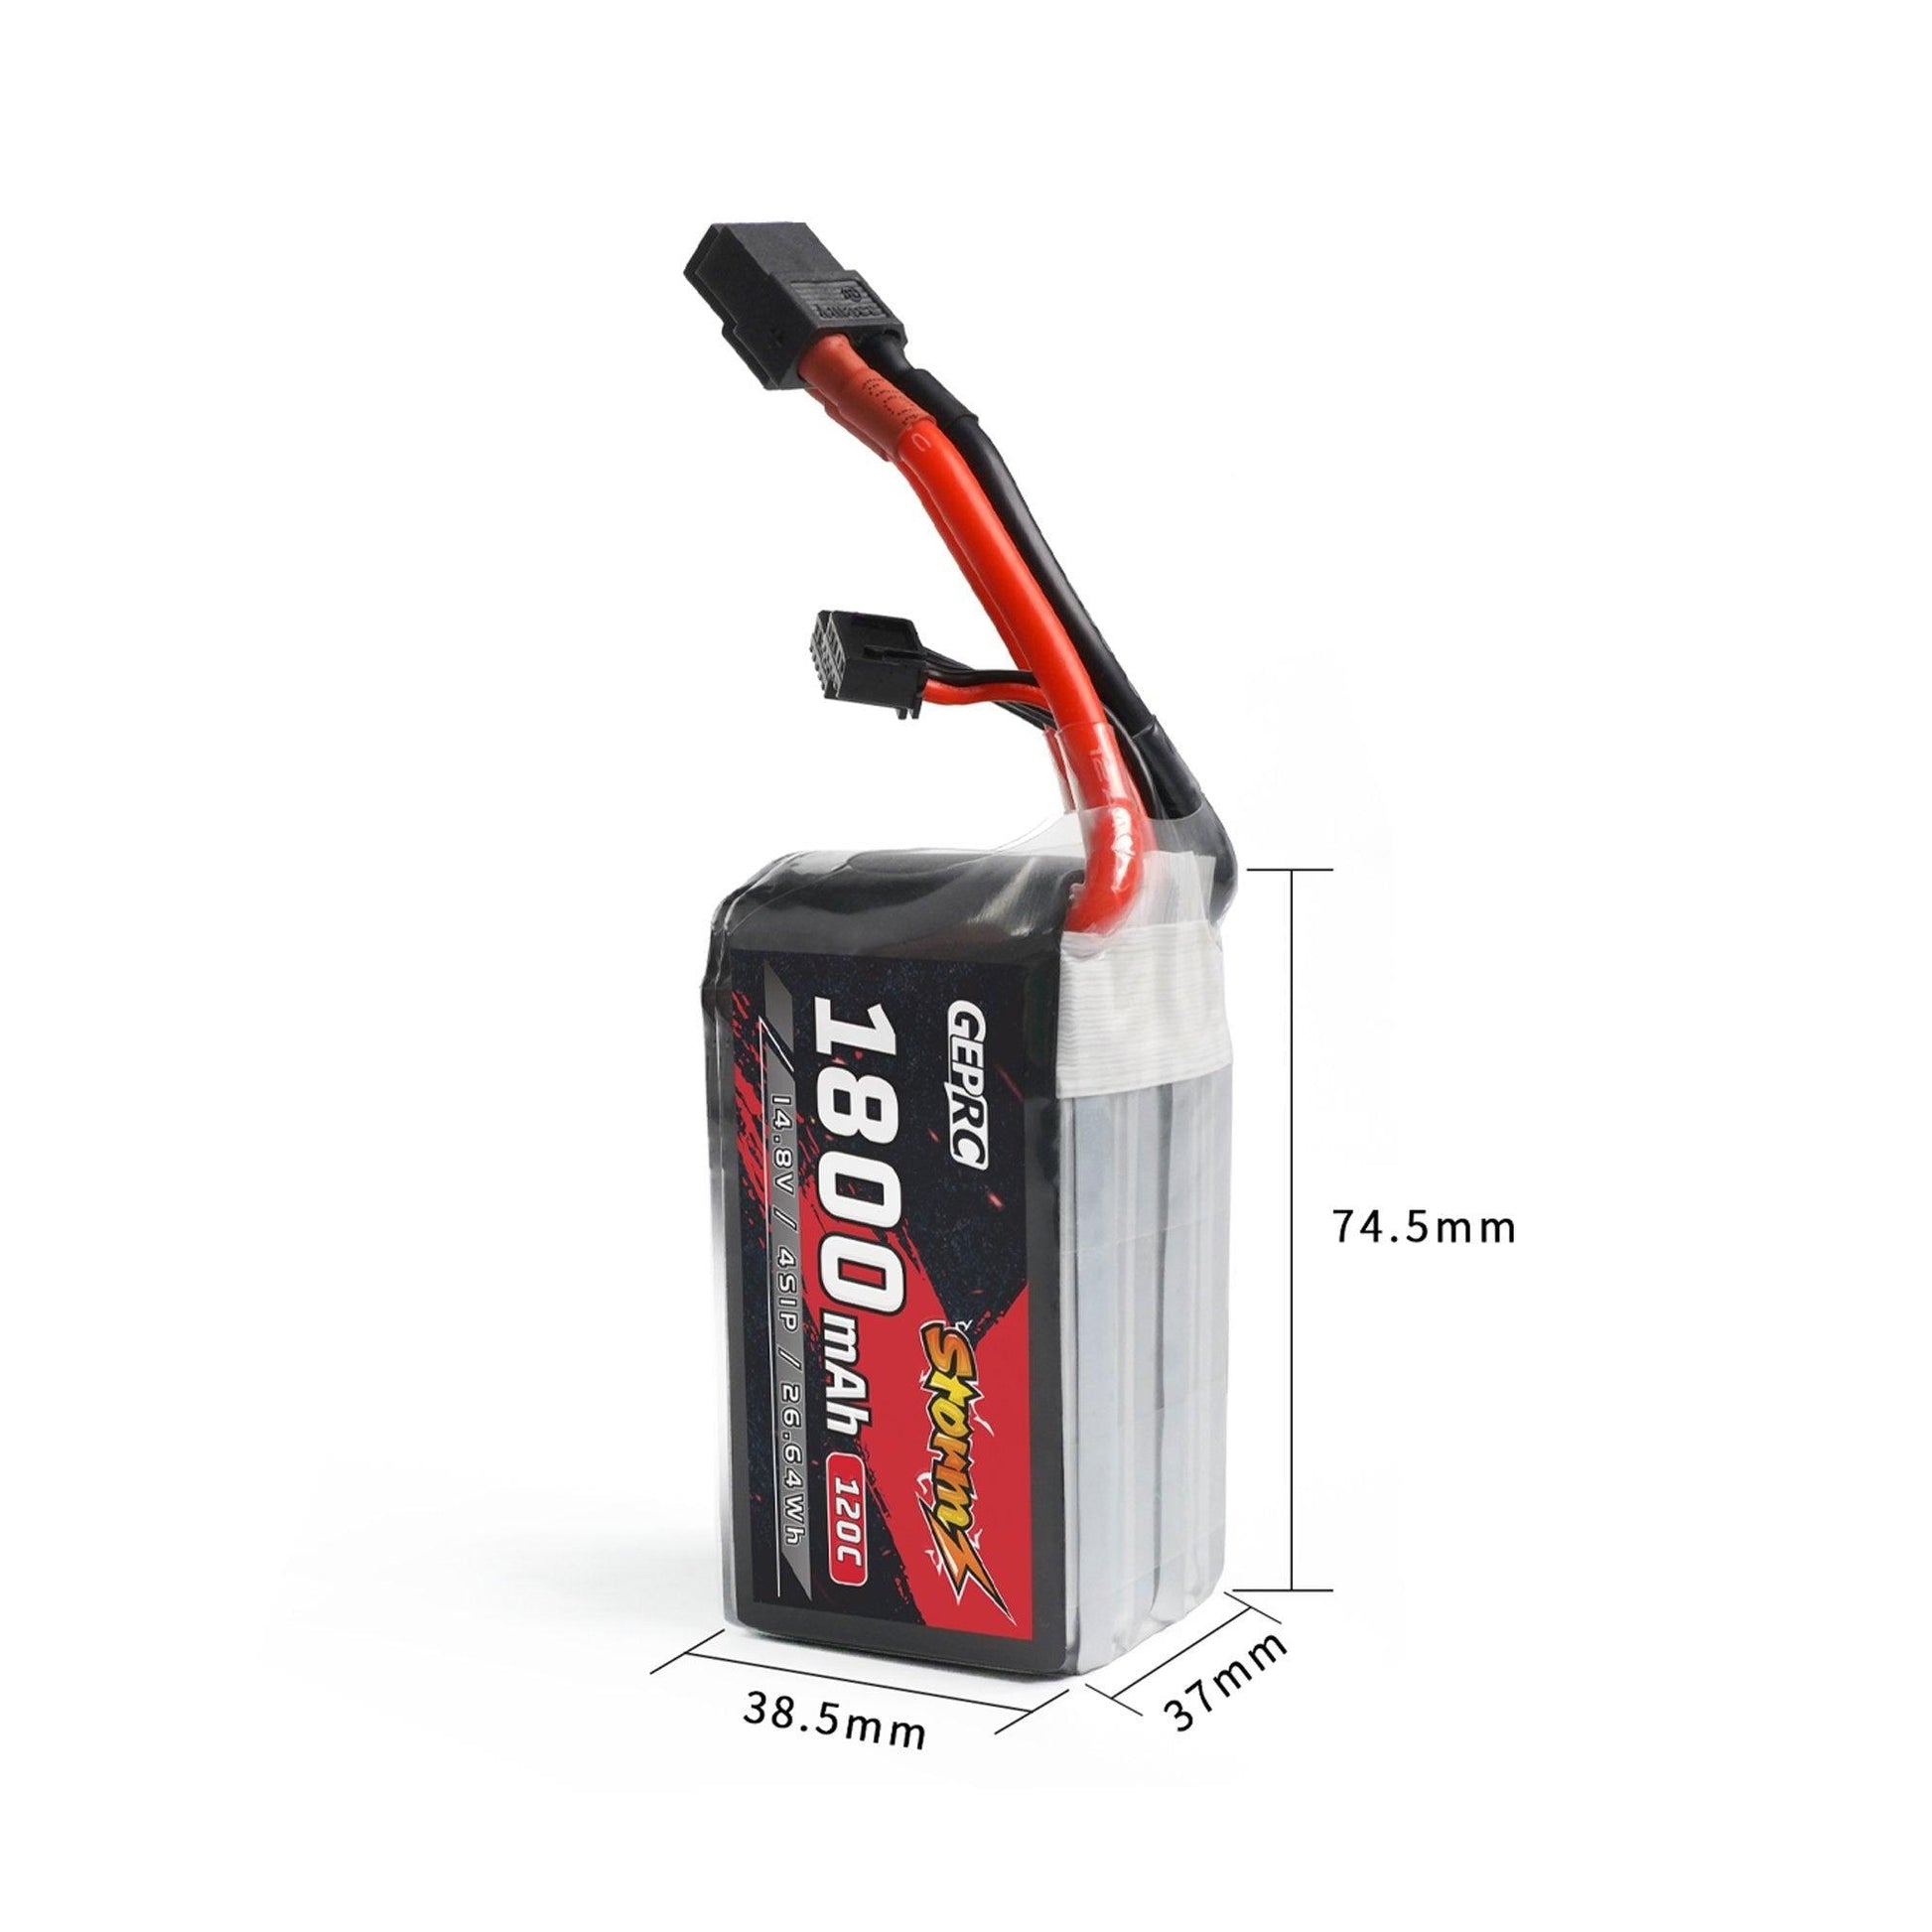 GEPRC Storm 4S 1800mAh 120C Lipo Battery - Suitable For 3-5Inch Series Drone For RC FPV Quadcopter Freestyle Series Drone FPV Battery - RCDrone